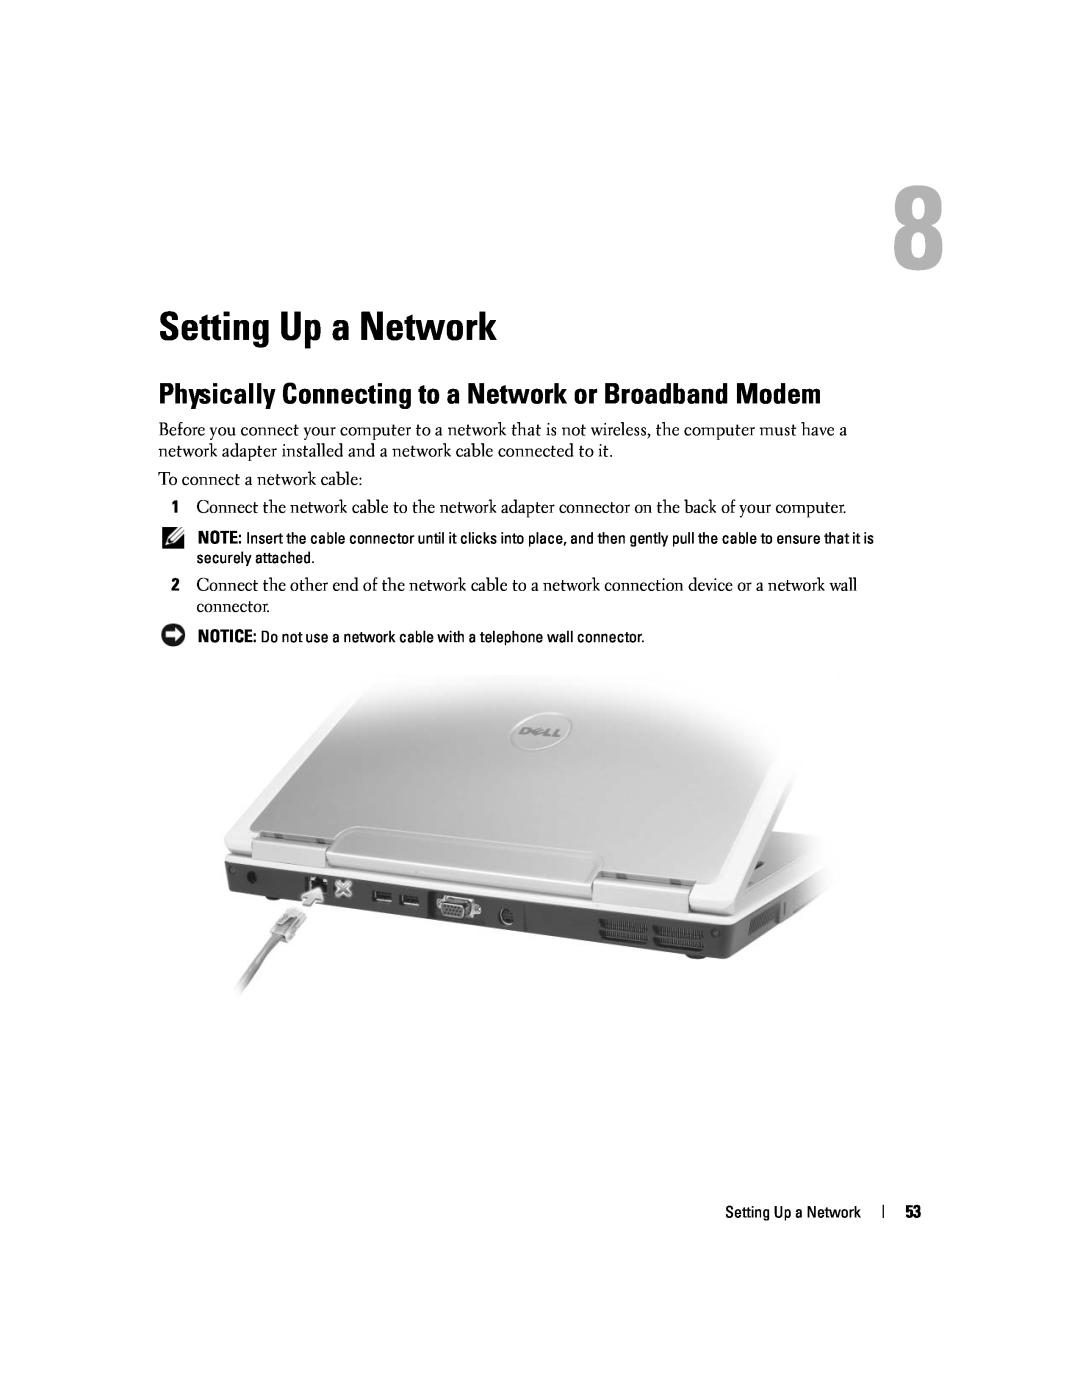 Dell 1501 owner manual Setting Up a Network, Physically Connecting to a Network or Broadband Modem 